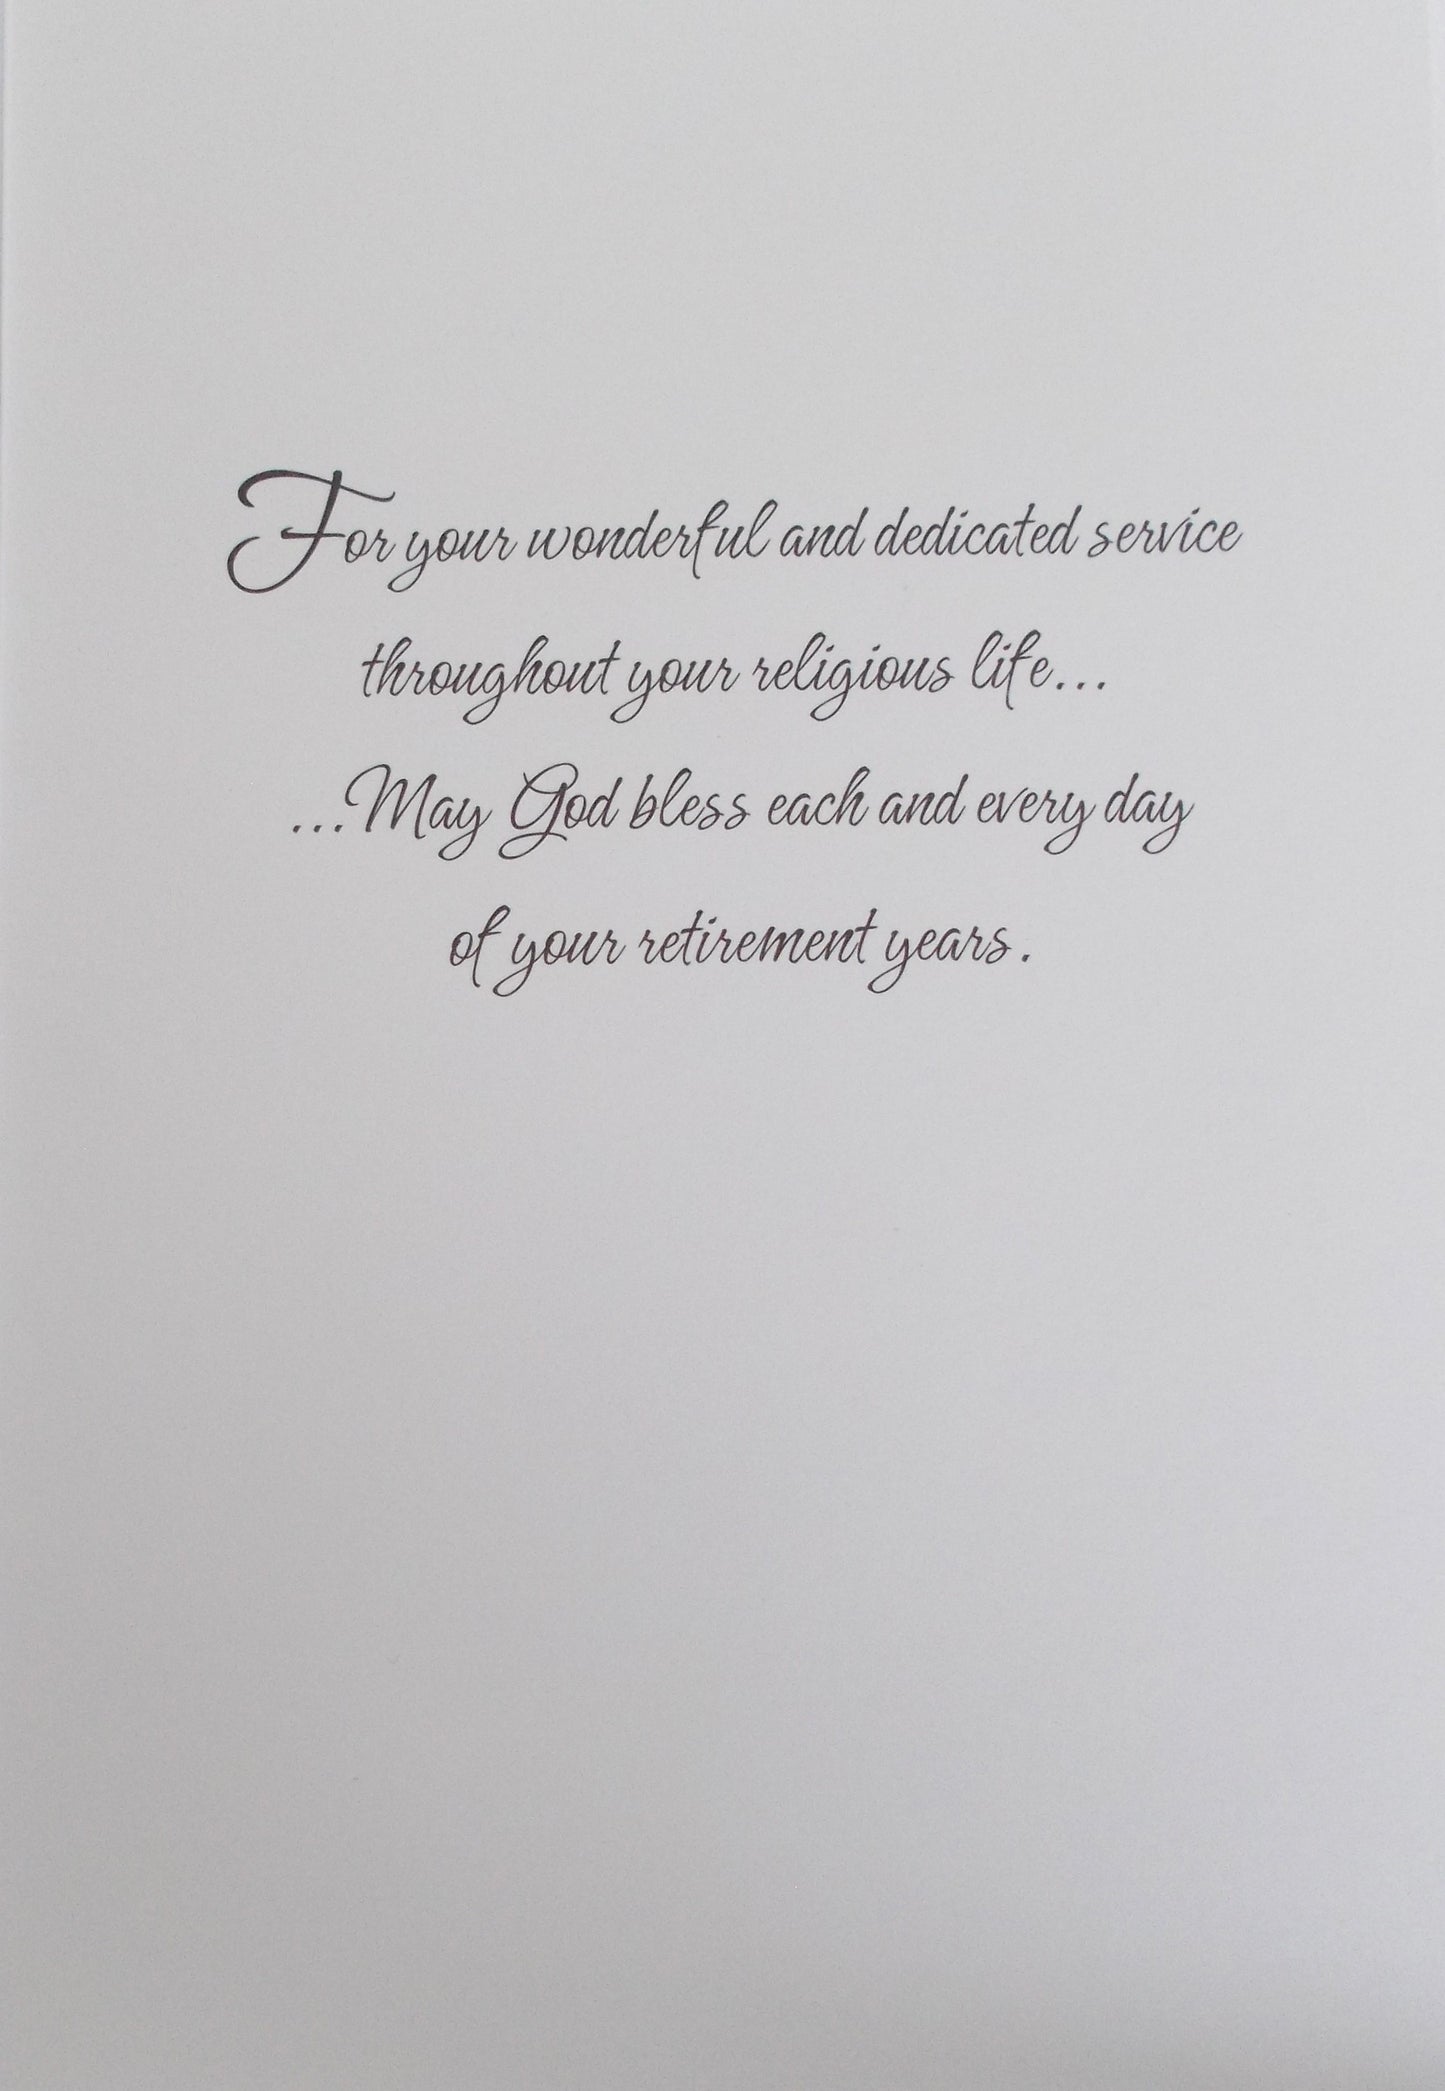 Religious Life Retirement Greeting Card